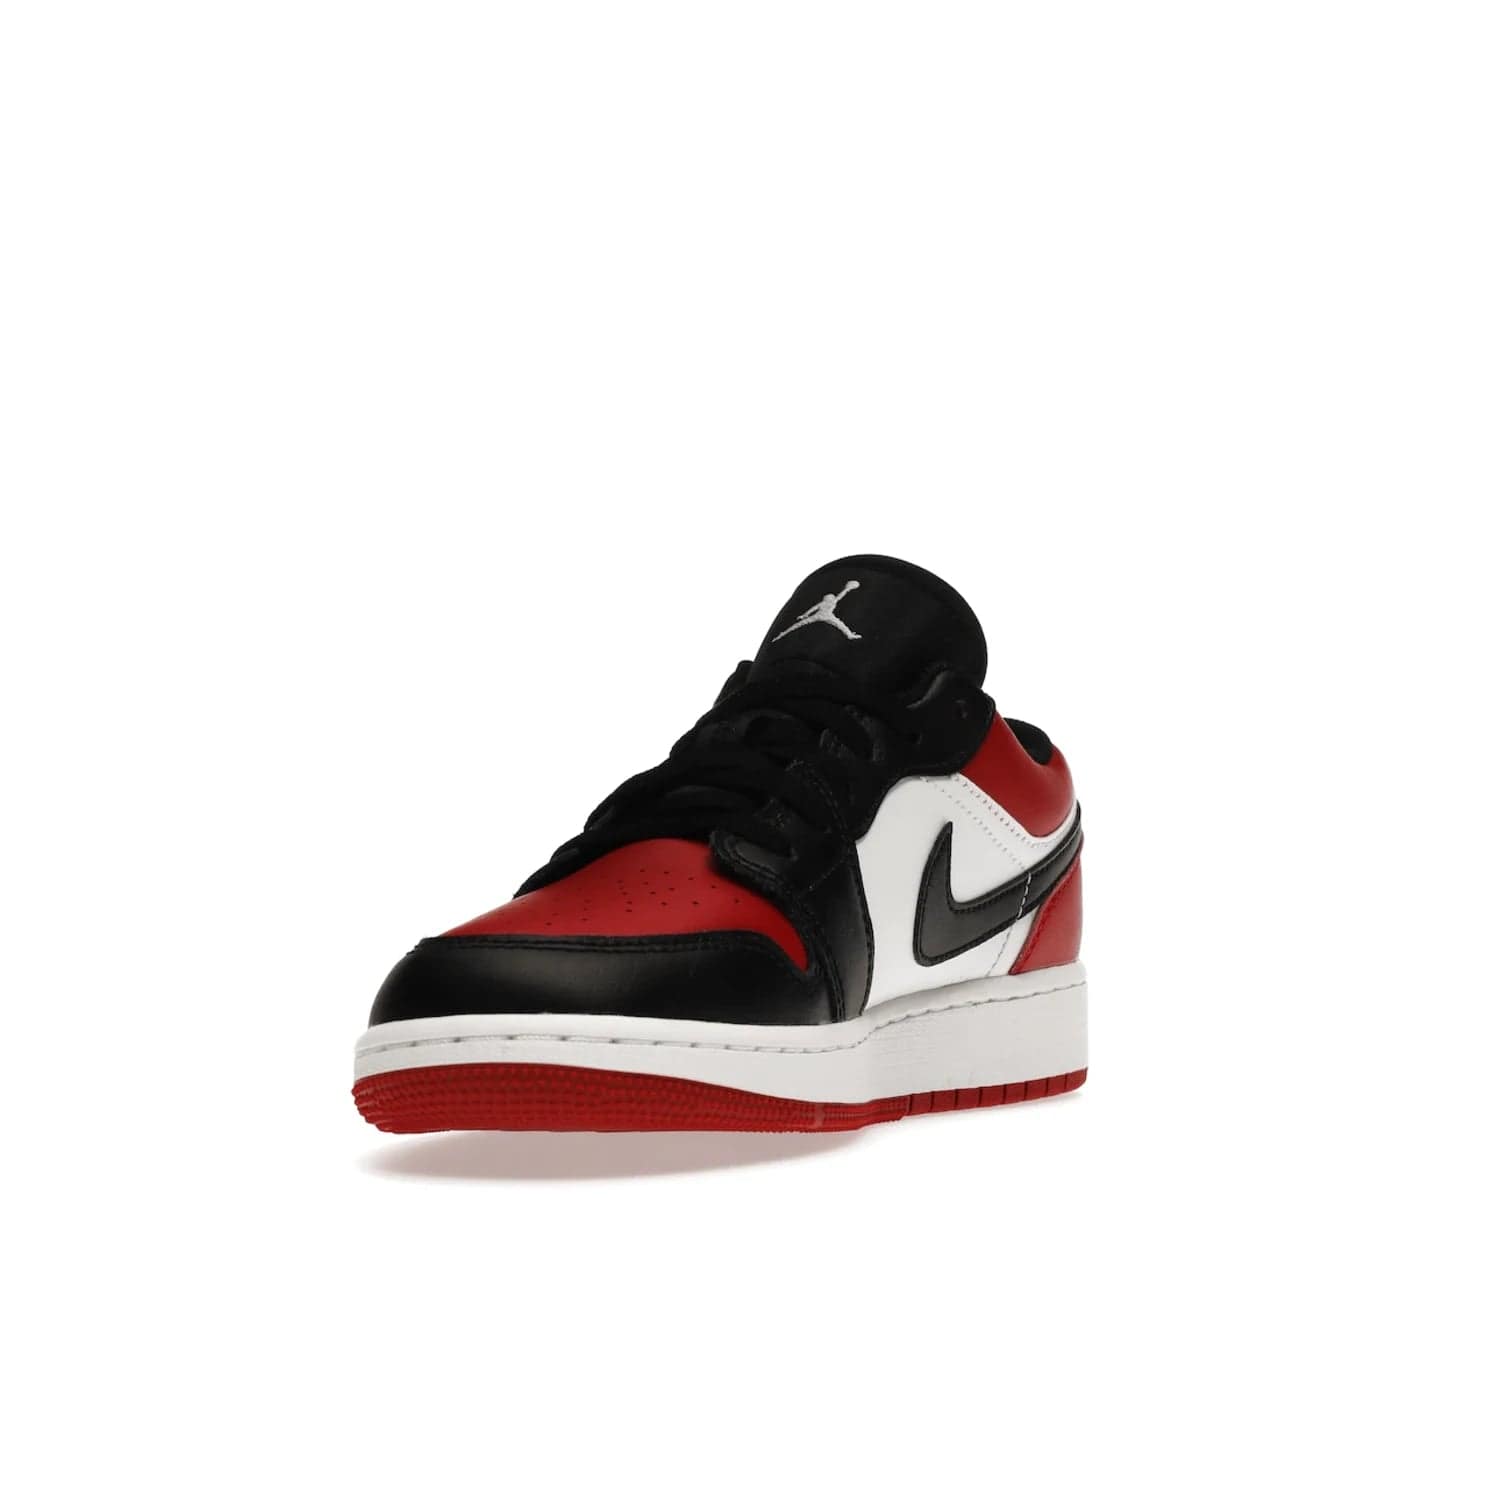 Jordan 1 Low Bred Toe (GS) - Image 13 - Only at www.BallersClubKickz.com - #
Iconic sneaker from Jordan brand with classic colorway, unique detailing & Air Jordan Wings logo. Step into the shoes of the greats with the Jordan 1 Low Bred Toe GS!